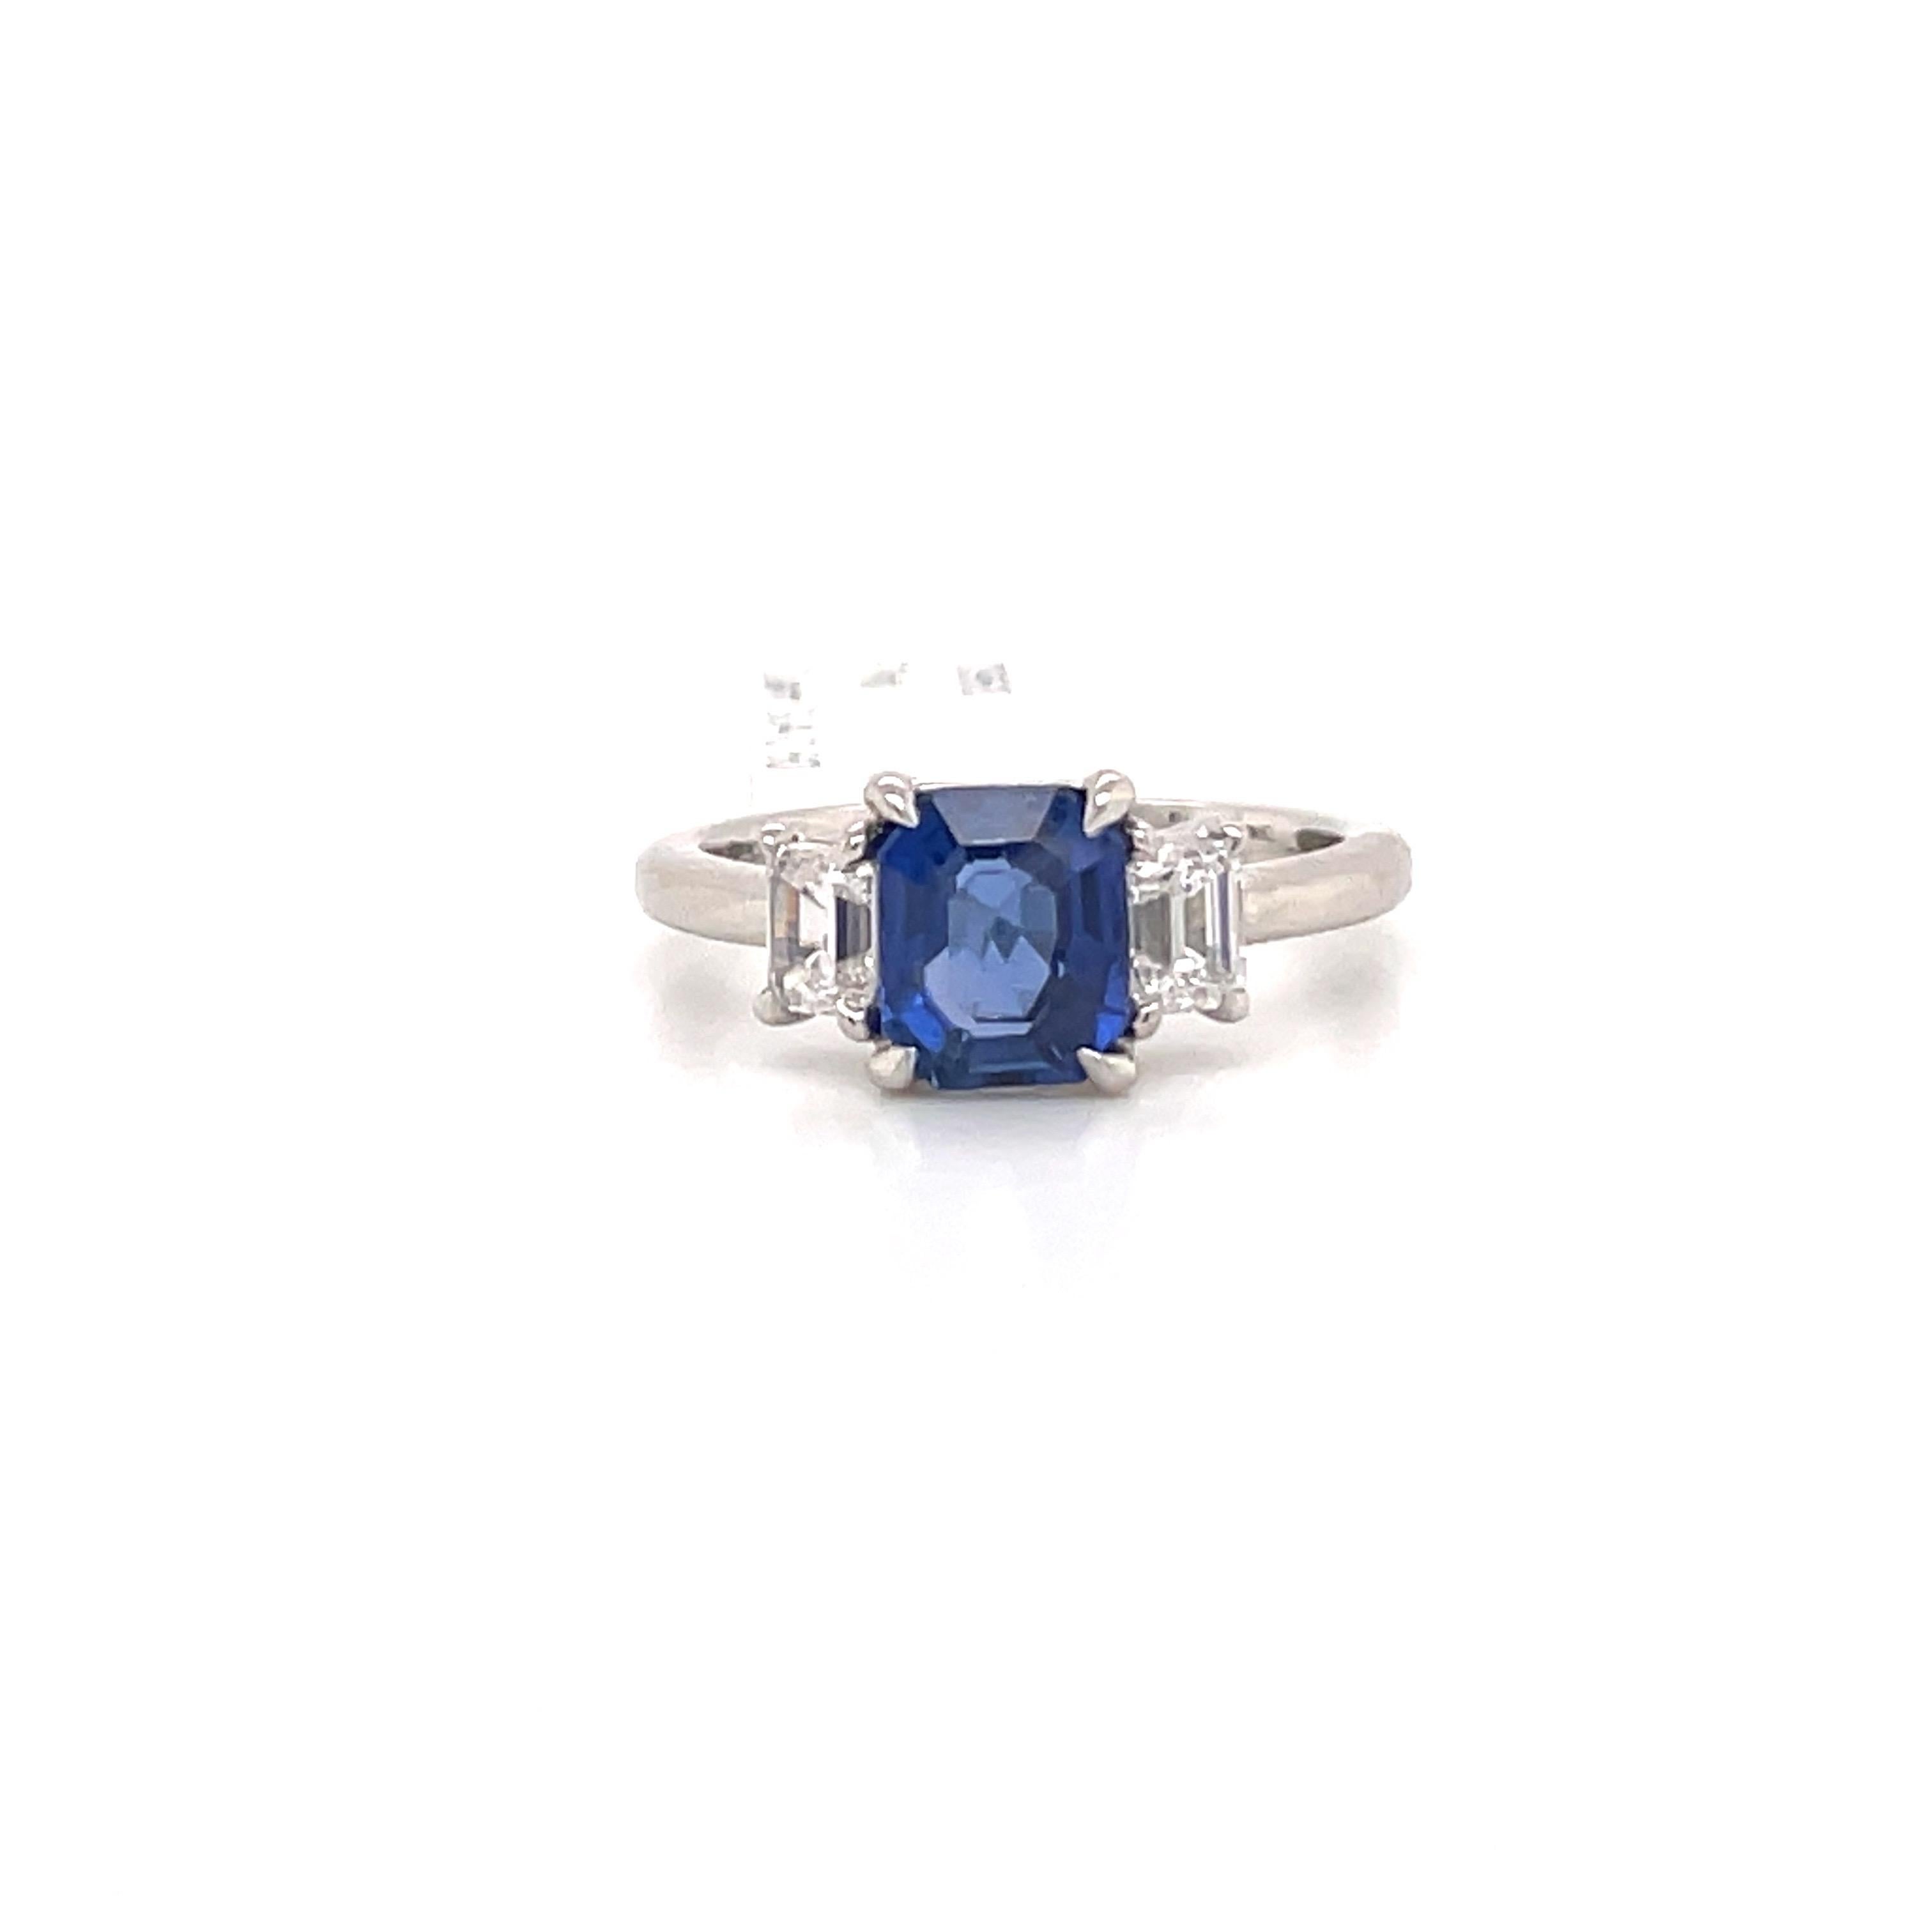 All GIA Certified three stone ring featuring one center Radiant cut Sapphire weighing 1.85 carats flanked with two Emerald cut diamonds weighing 0.60 carats.
Diamonds are GIA Certified D-F VS1